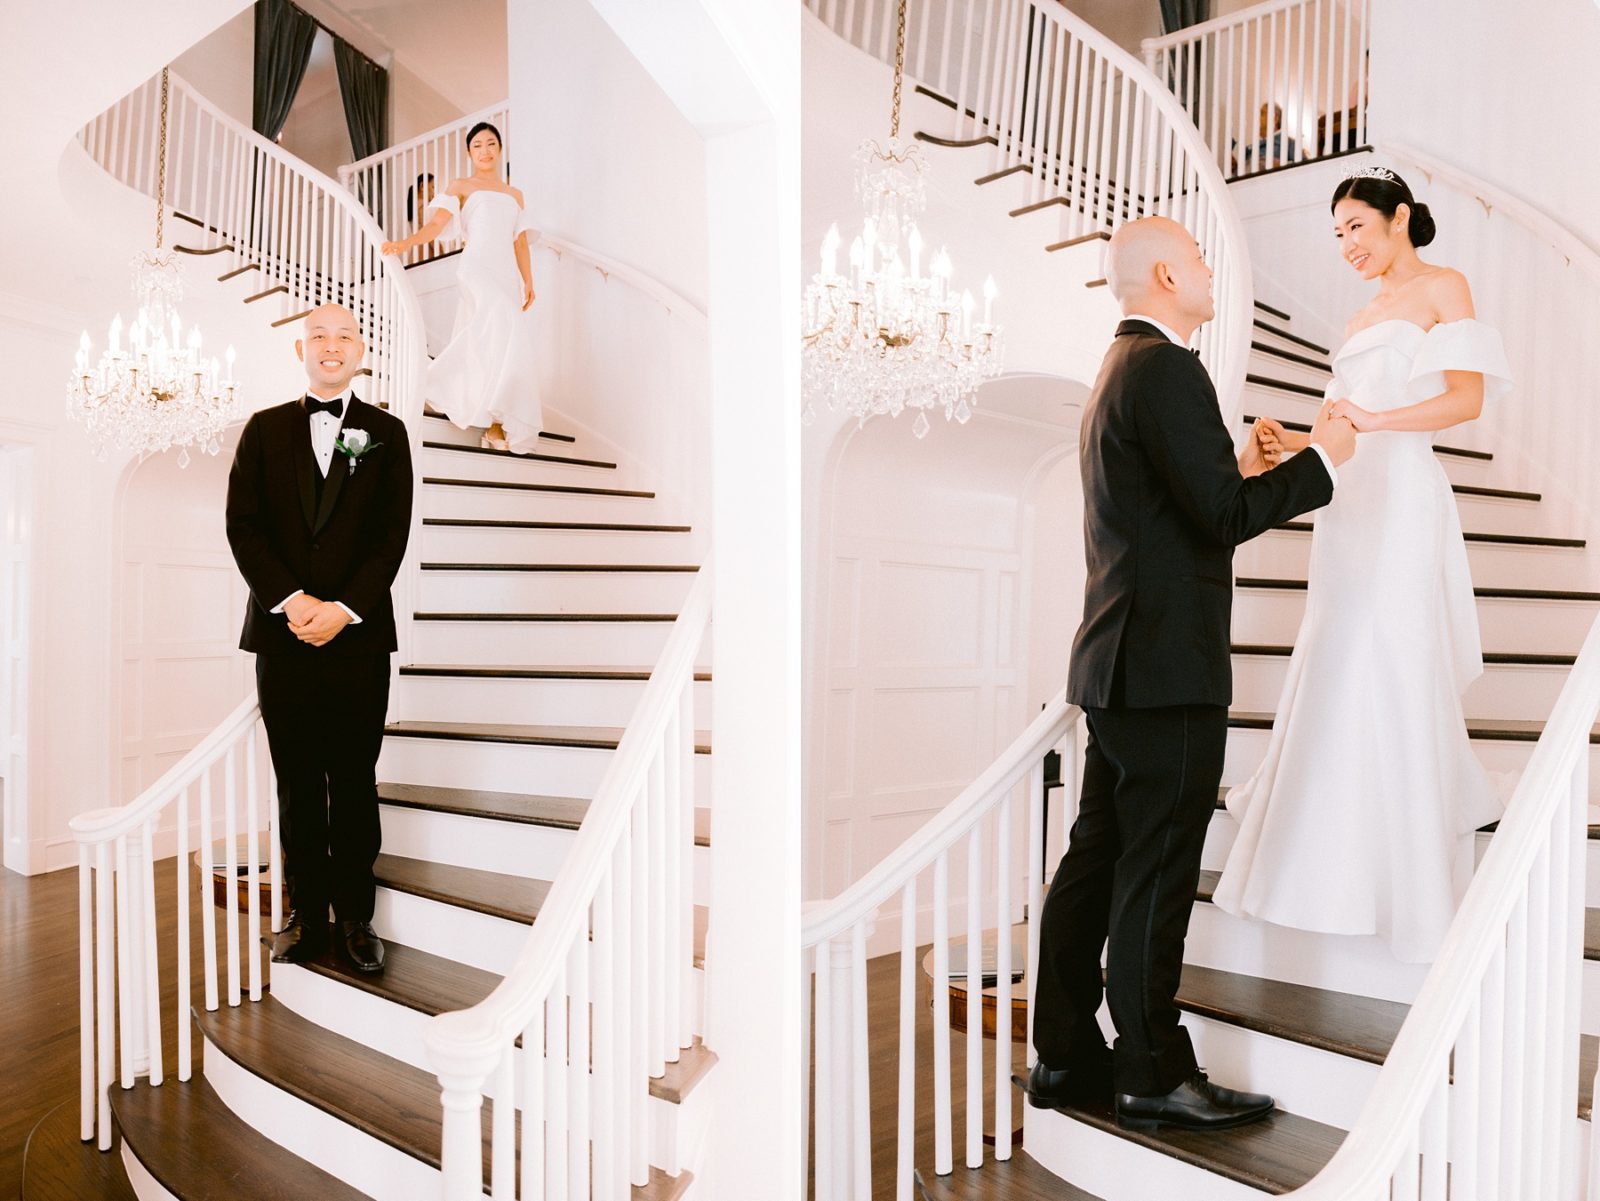 wedding first look on stairs, disney princess wedding vibes, bride with tiara, bride and groom first look, woodbine mansion wedding, woodbine mansion wedding details, classic austin wedding, mansion wedding venues near austin, historical wedding venue, best austin wedding venues, austin wedding photographer, hill country wedding, round rock wedding venue